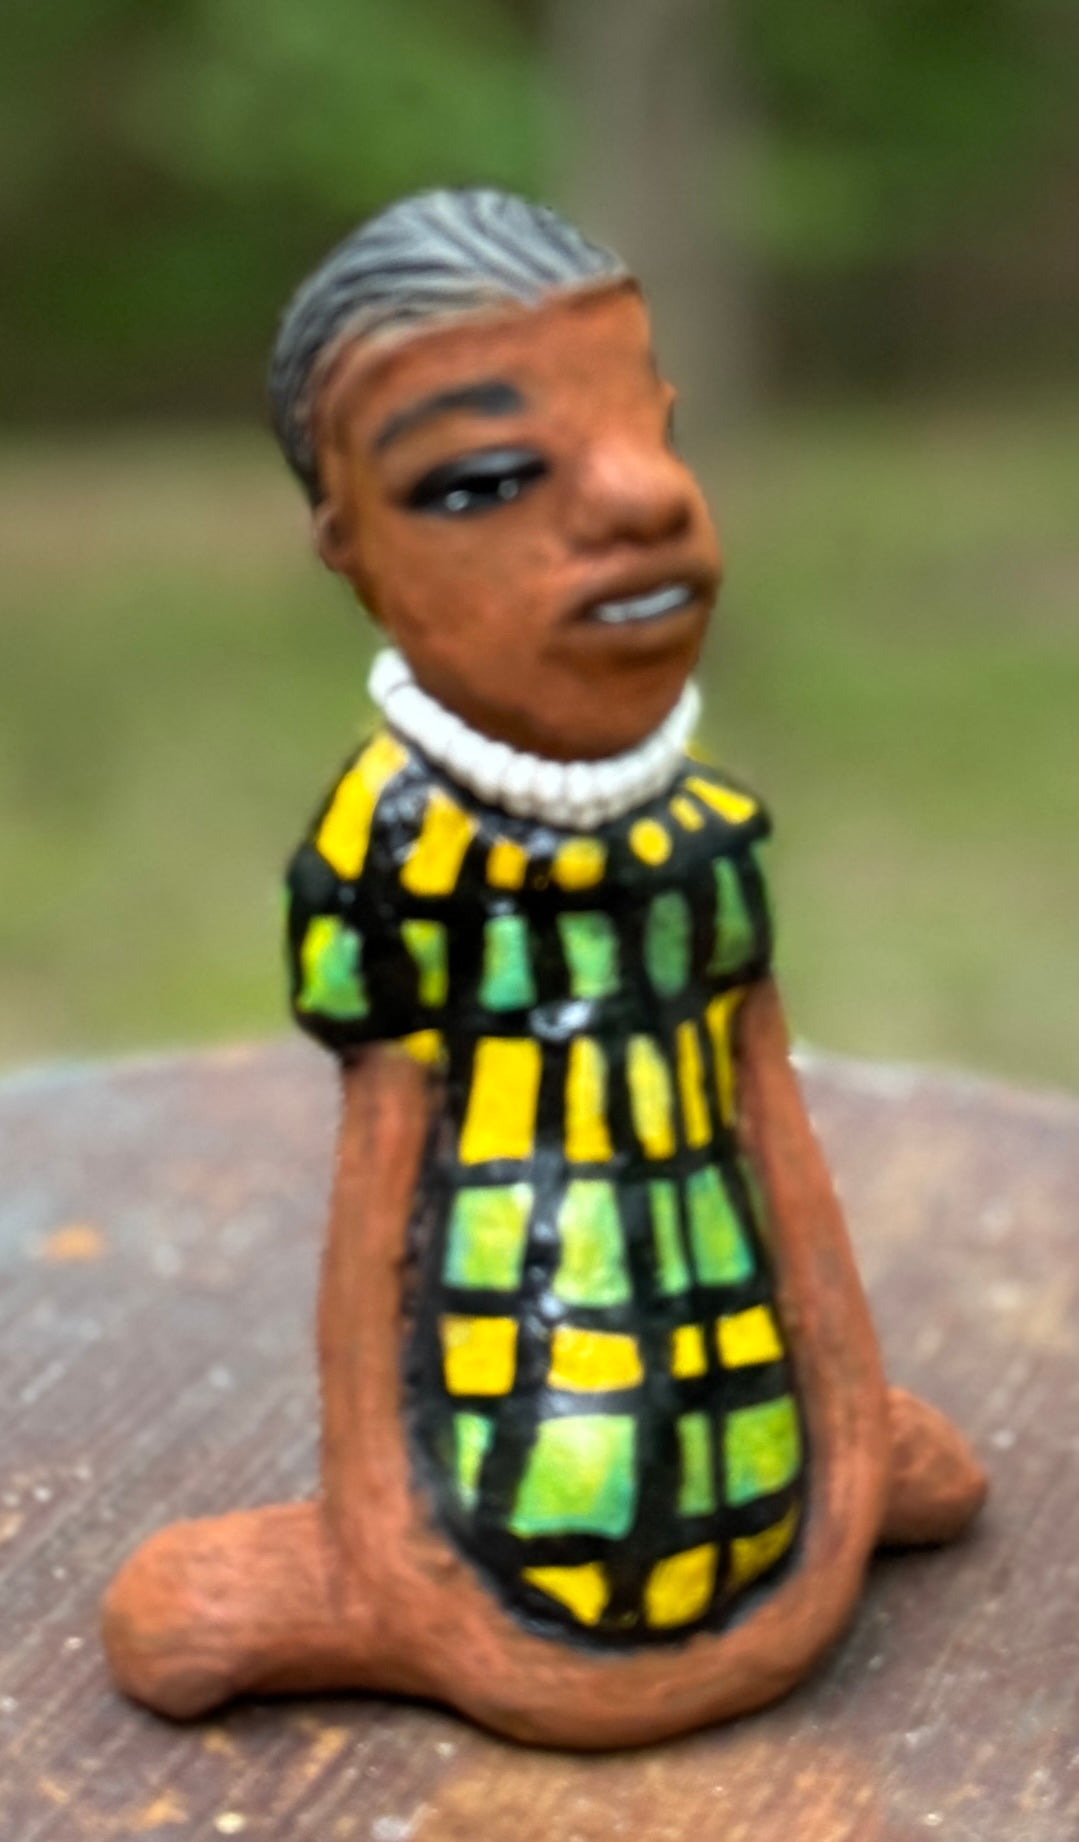 <p>Experience the bold and fearless Efia from the Herdew Collection! This raku fired sculpture stands tall at 6" x 4" x 3" and weighs a brave 10.44 ozs. Clothed in a striking yellow and green dress, Efia's coiled wire hair stretches over 1 foot. With confident outstretched arms, she strikes a yoga pose. Begin your collection with the captivating Efia and embrace adventure!</p> <p>&nbsp;</p>